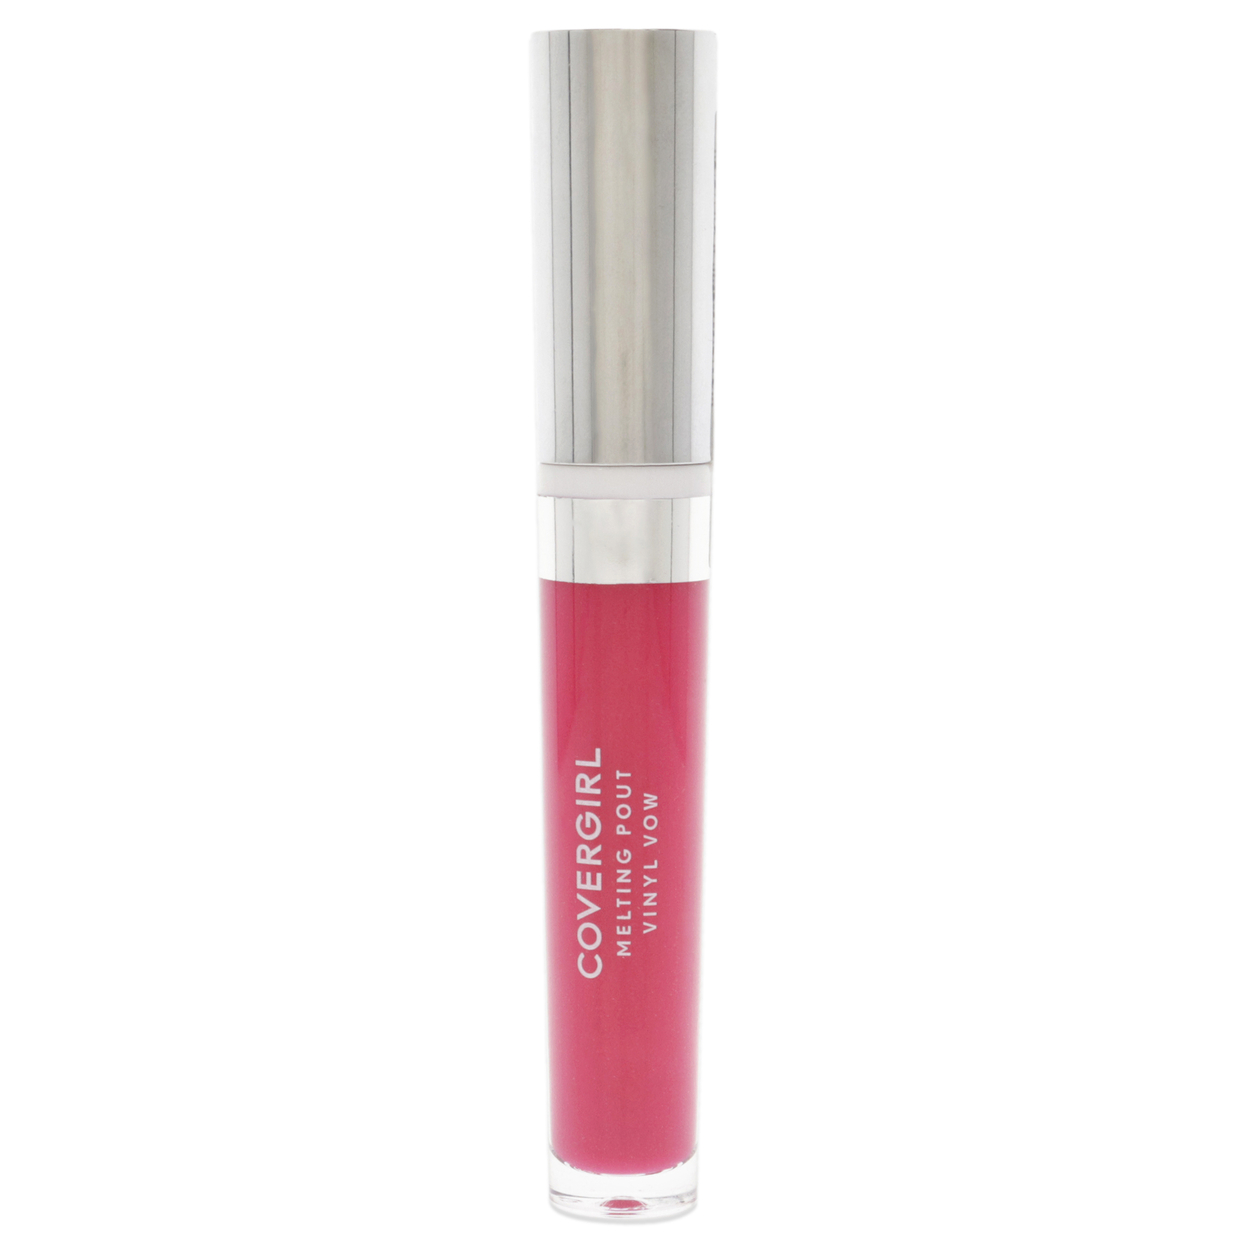 Covergirl Melting Pout Vinyl Vow - 220 Vibrant Thing Lip Gloss 0.11 Oz